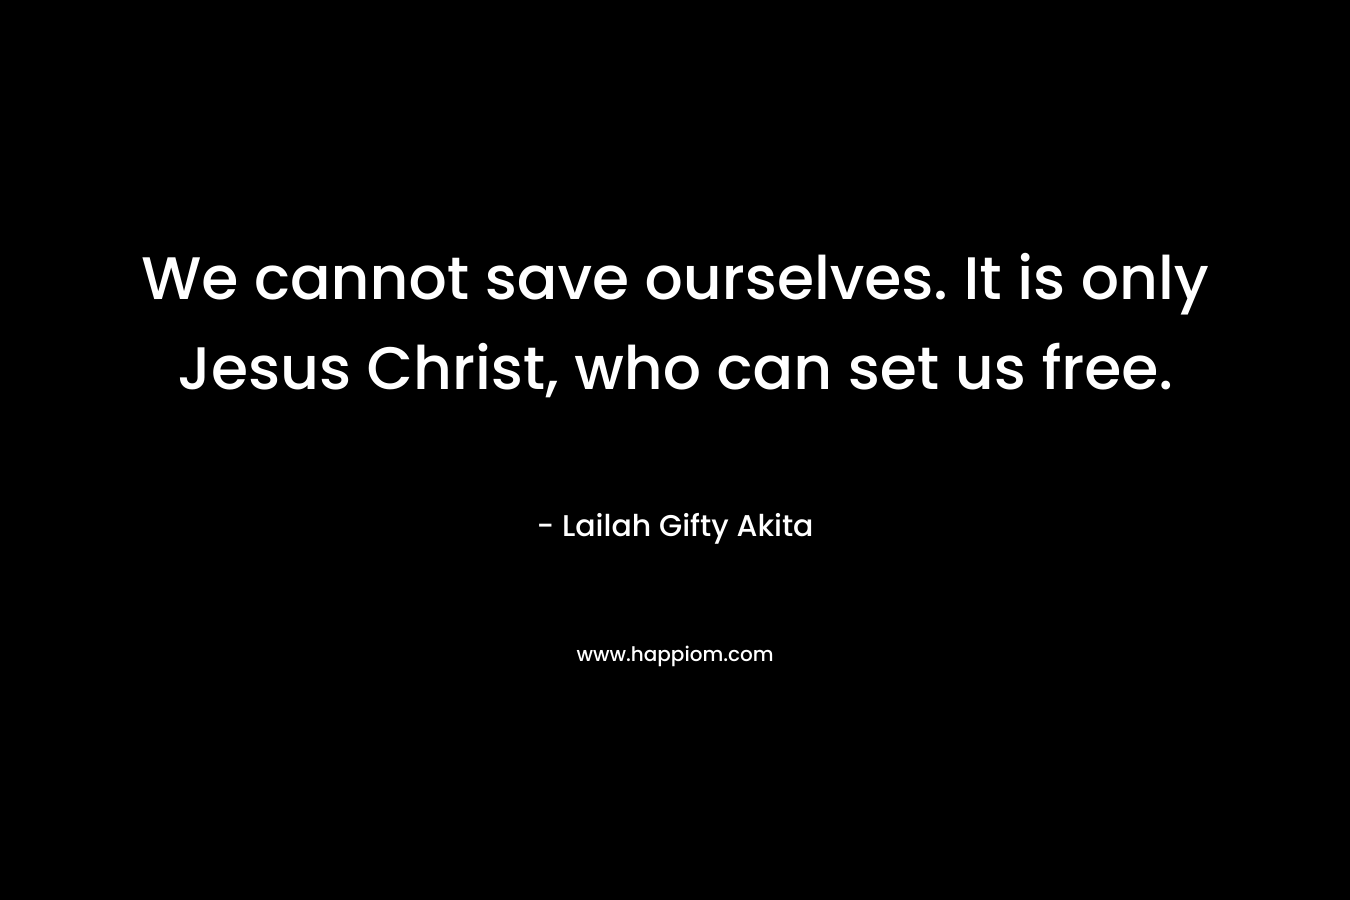 We cannot save ourselves. It is only Jesus Christ, who can set us free.